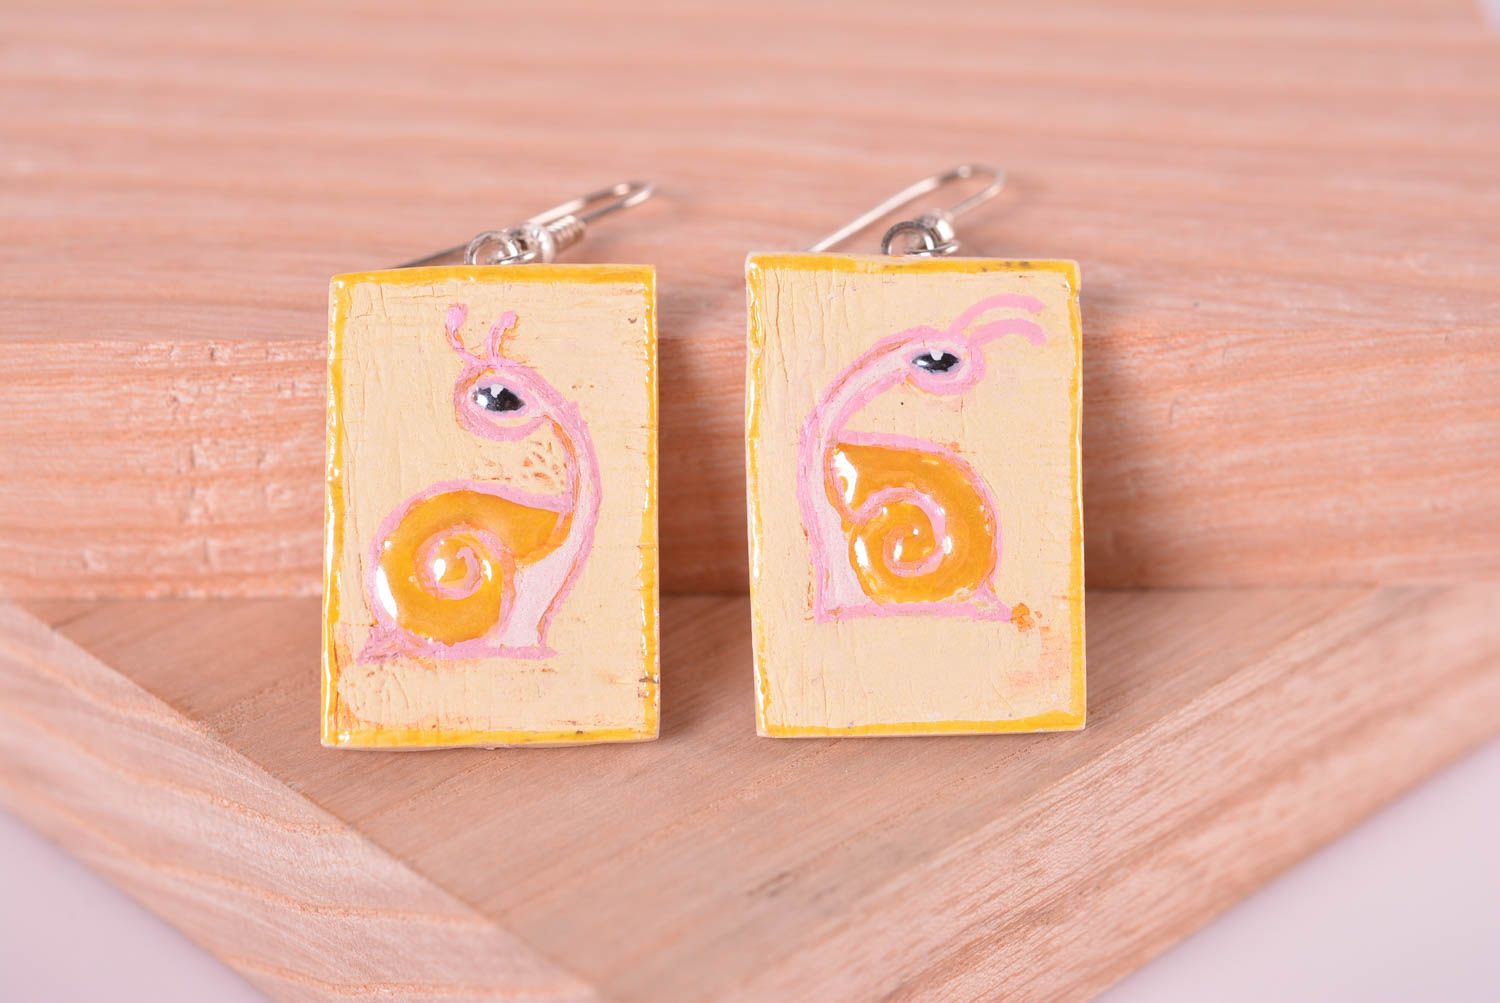 Jewelry handmade earrings long earrings with painted snails designer gift photo 2